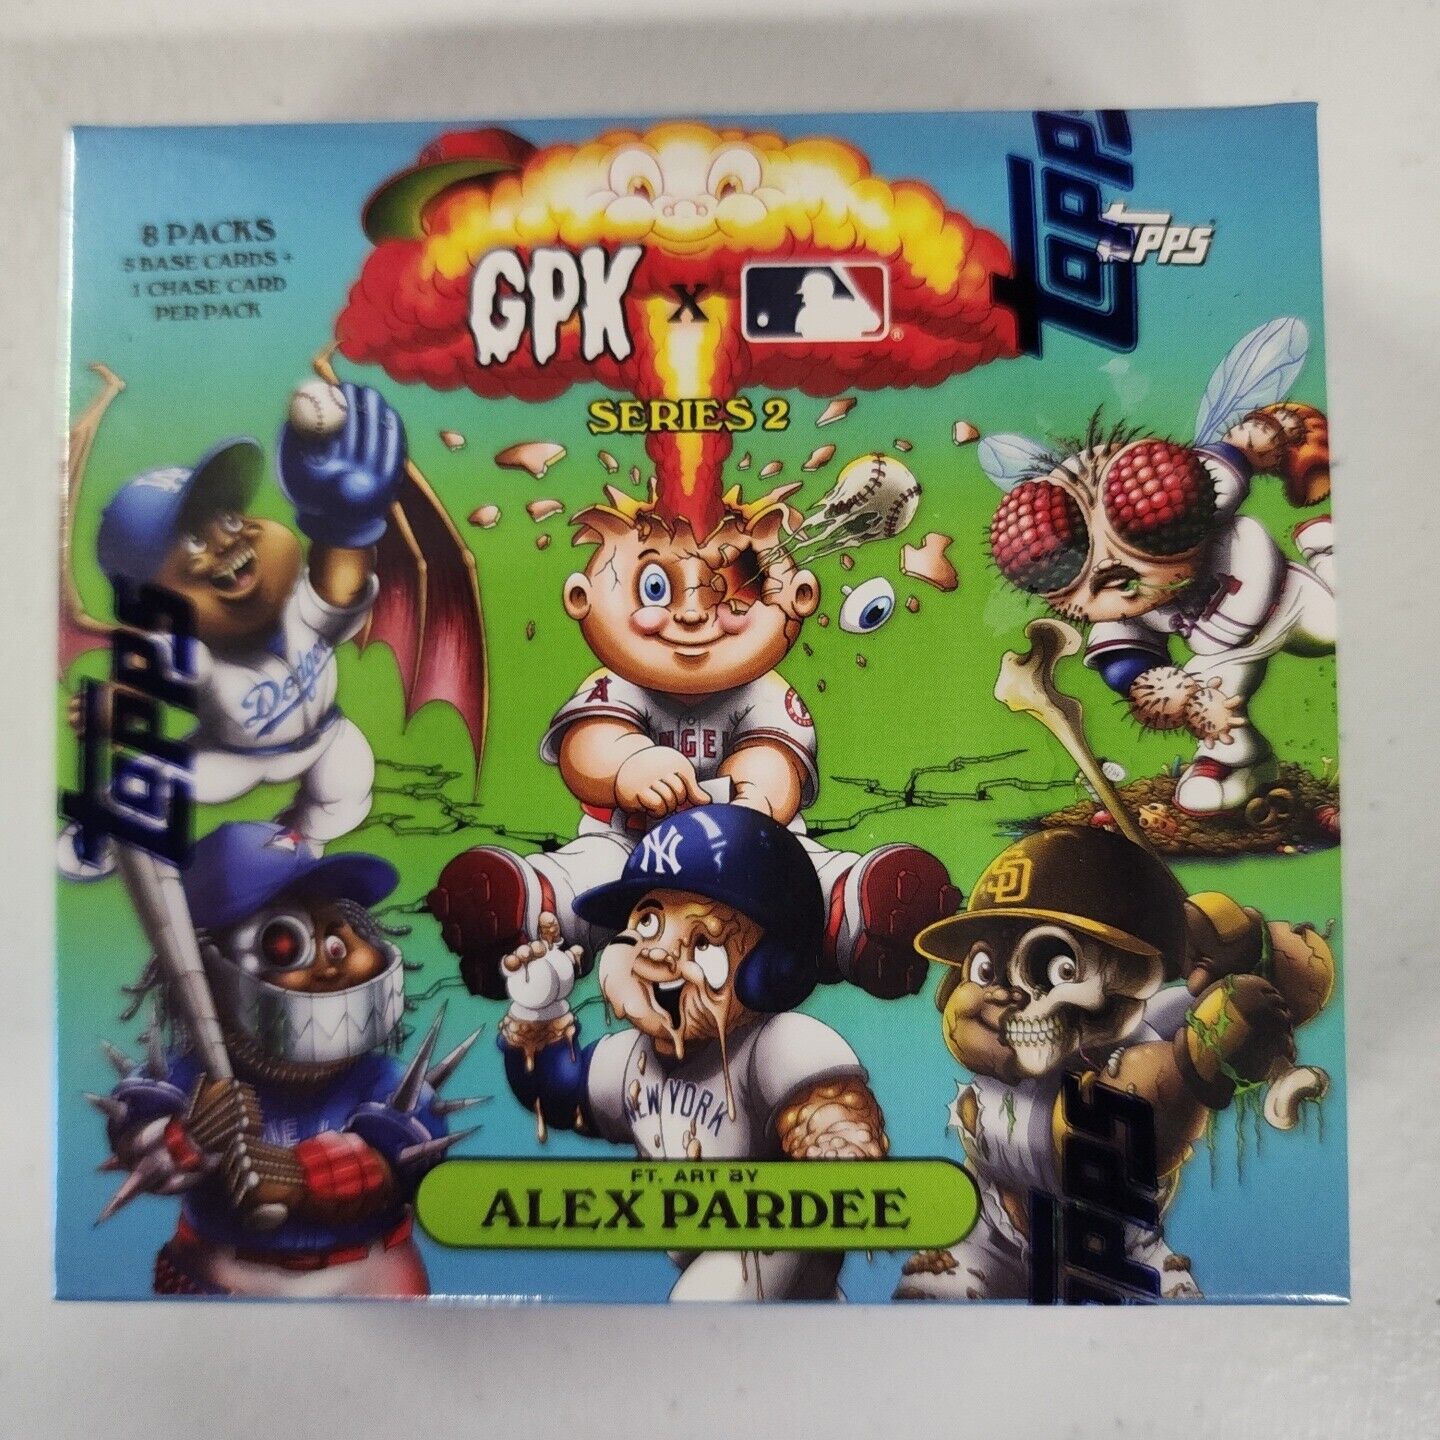 2022 Topps GPK x MLB Series 2 by Alex Pardee 8 Pack Box Sealed